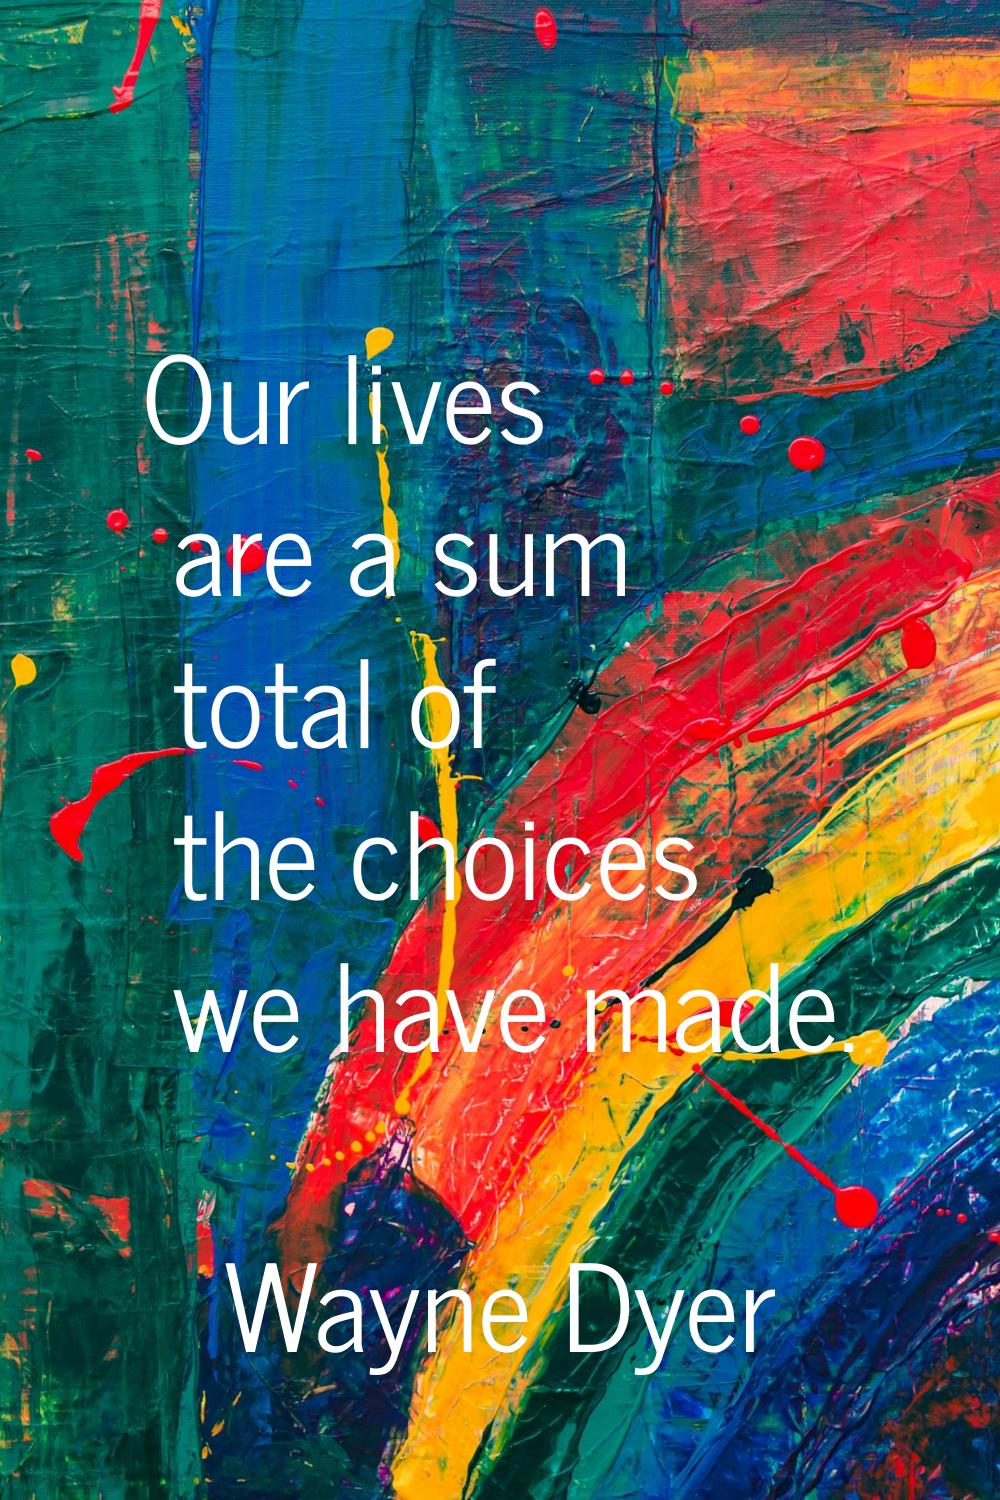 Our lives are a sum total of the choices we have made.